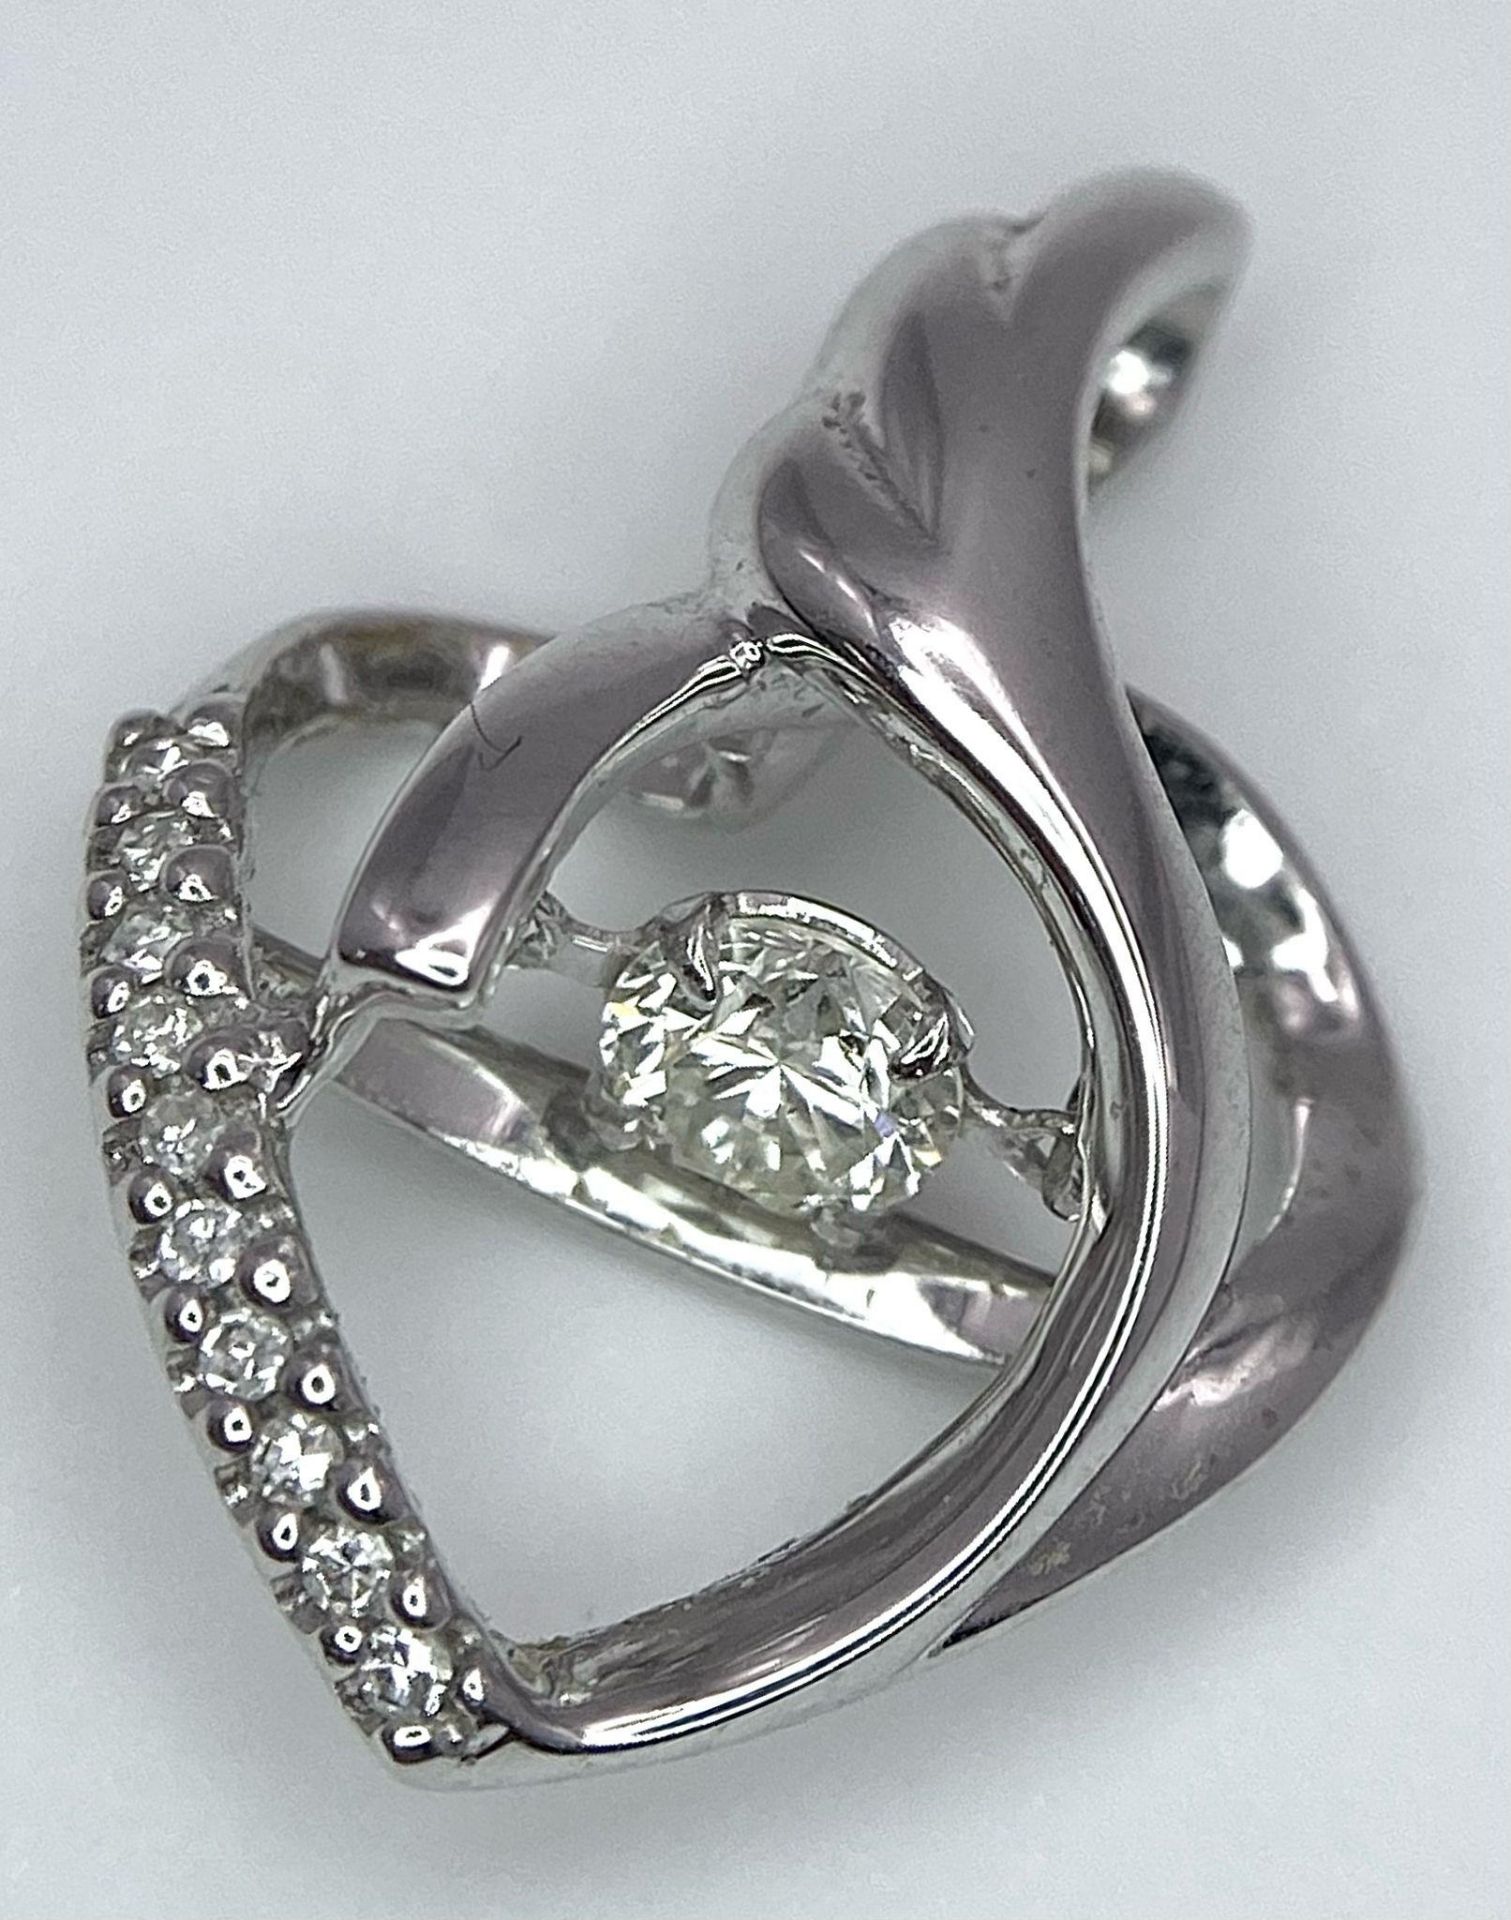 An 18K White Gold and Diamond Heart Pendant. A spinning central round cut diamond powers this